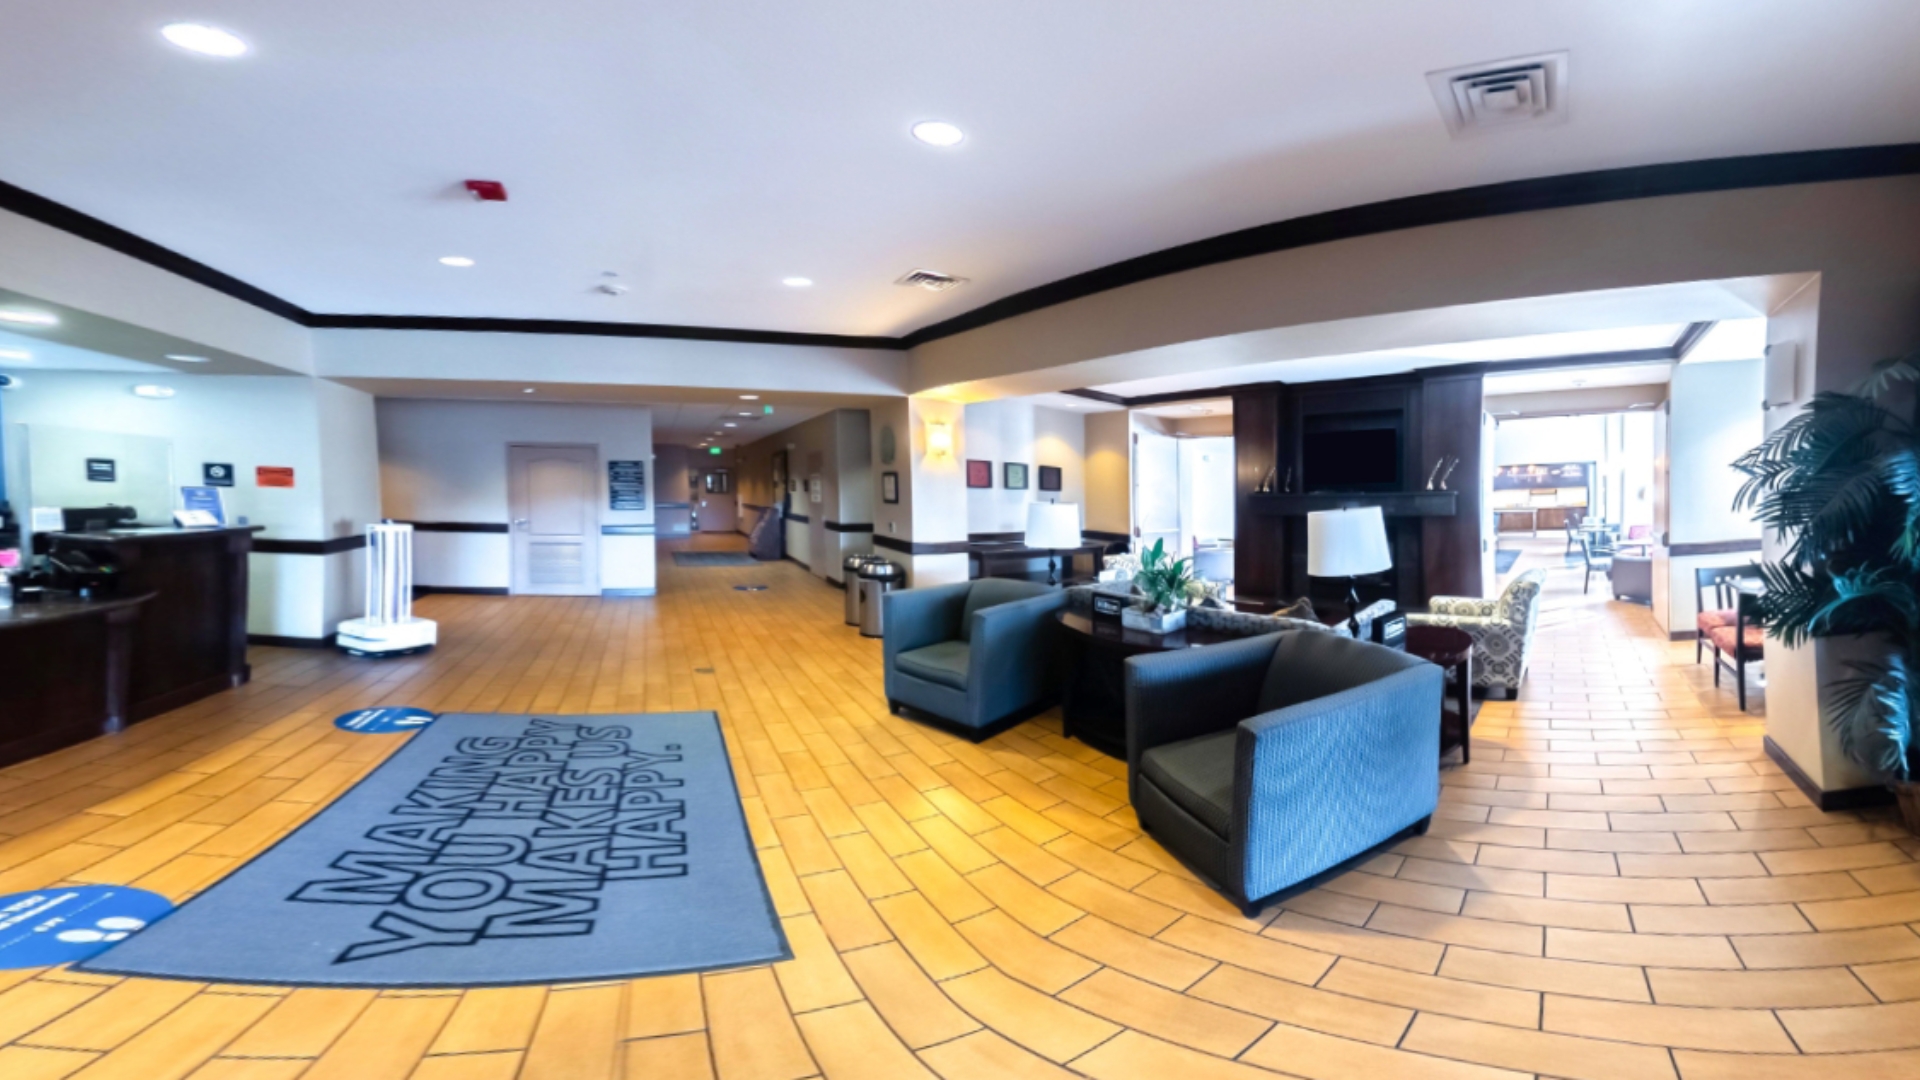 Hotel lobby featuring a spacious area with a large rug, gray couches, and a reception area.